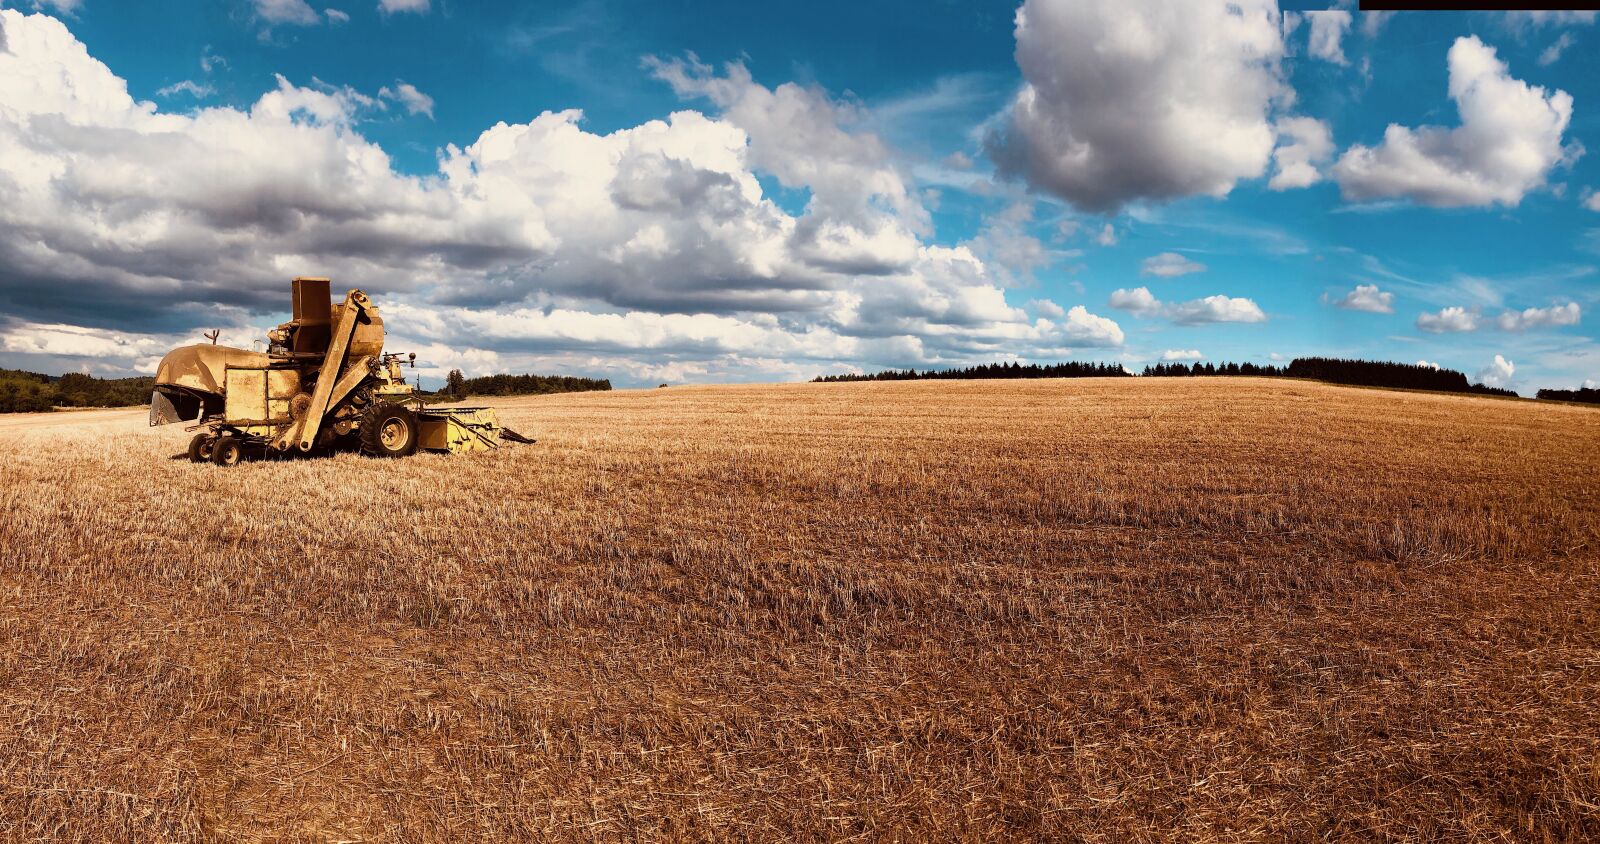 Apple iPhone X + iPhone X back camera 4mm f/1.8 sample photo. Field, hayfield, tractor photography